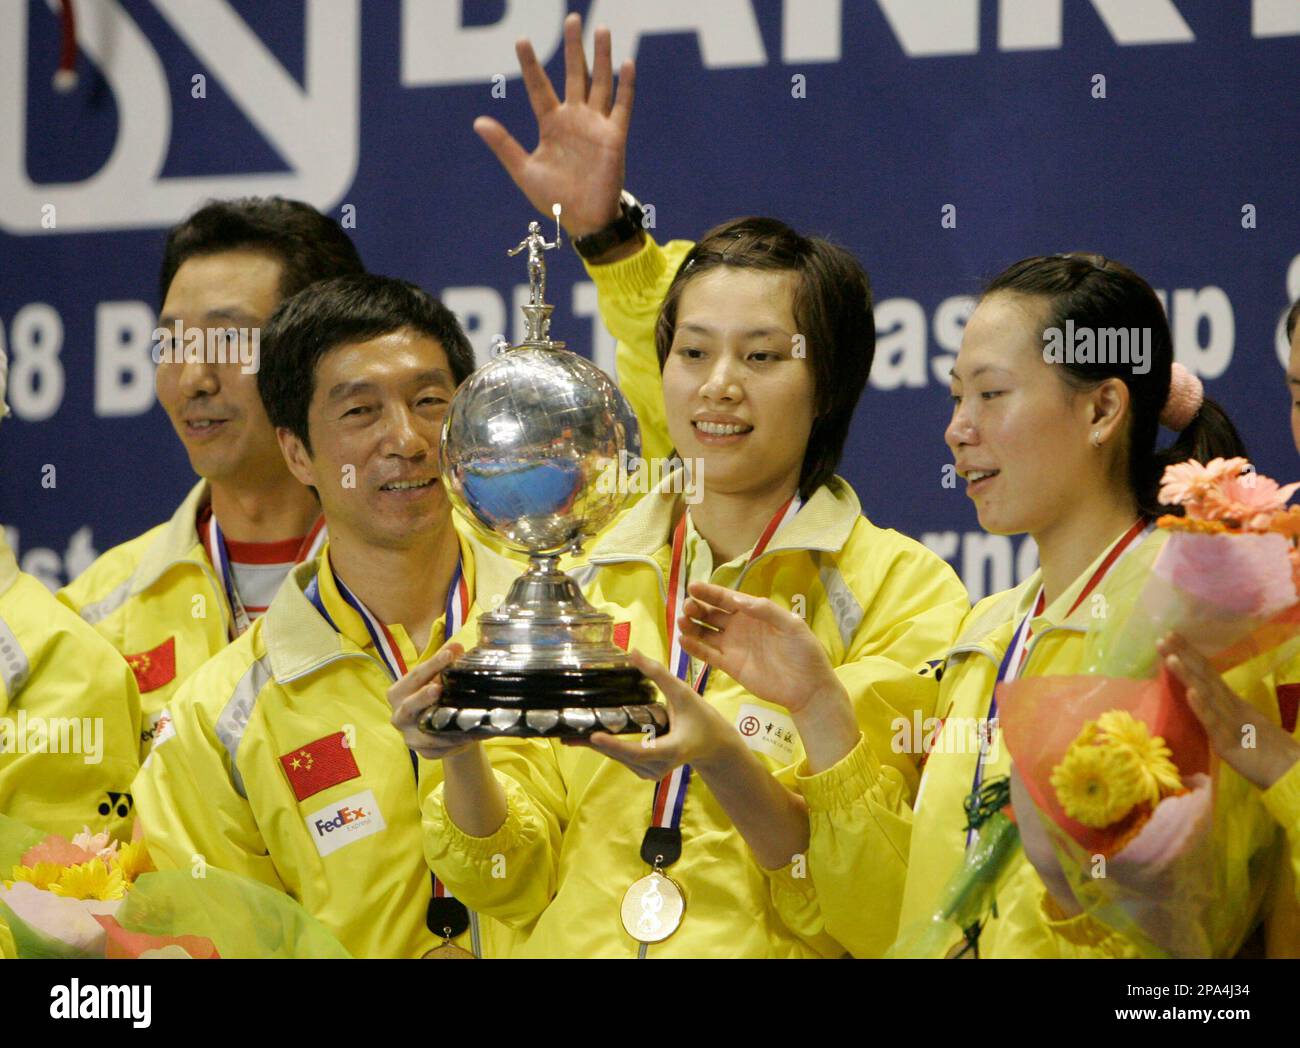 Chinas Xie Xinfang holds the Uber Cup trophy after China defeated Indonesia in the Uber Cup badminton championship final at Istora Senayan stadium in Jakarta, Indonesia, Saturday, May 17, 2008